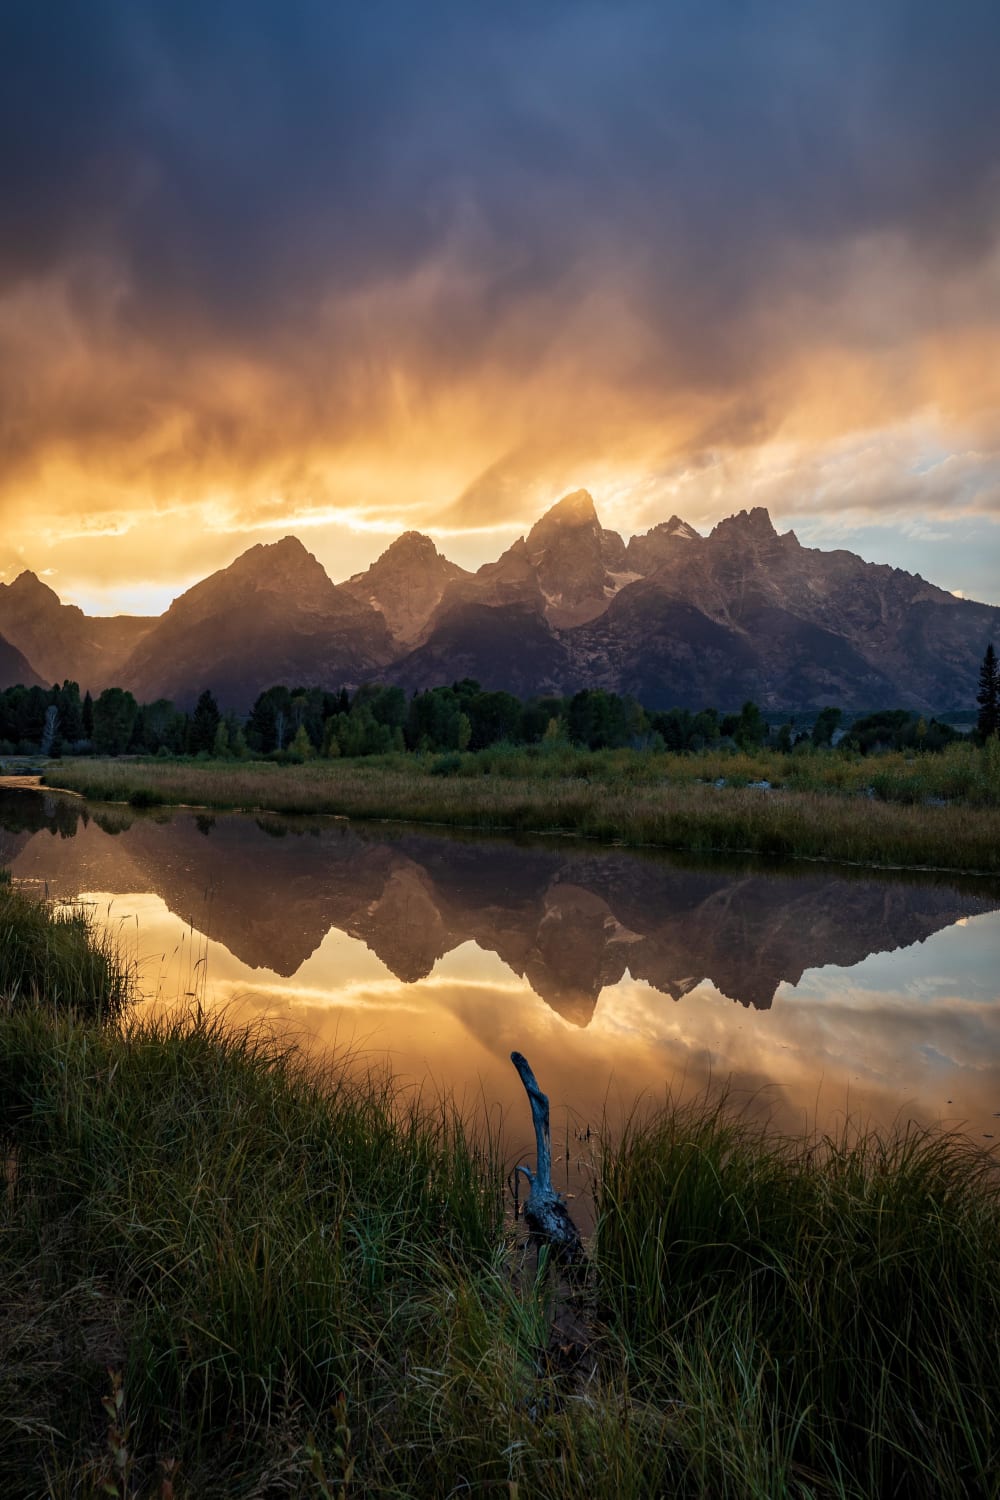 Thunderstorms were all around me echoing in the distance, but it remained calm where I was standing creating an ominous sky and reflection - Grand Teton National Park IG: @travlonghorns